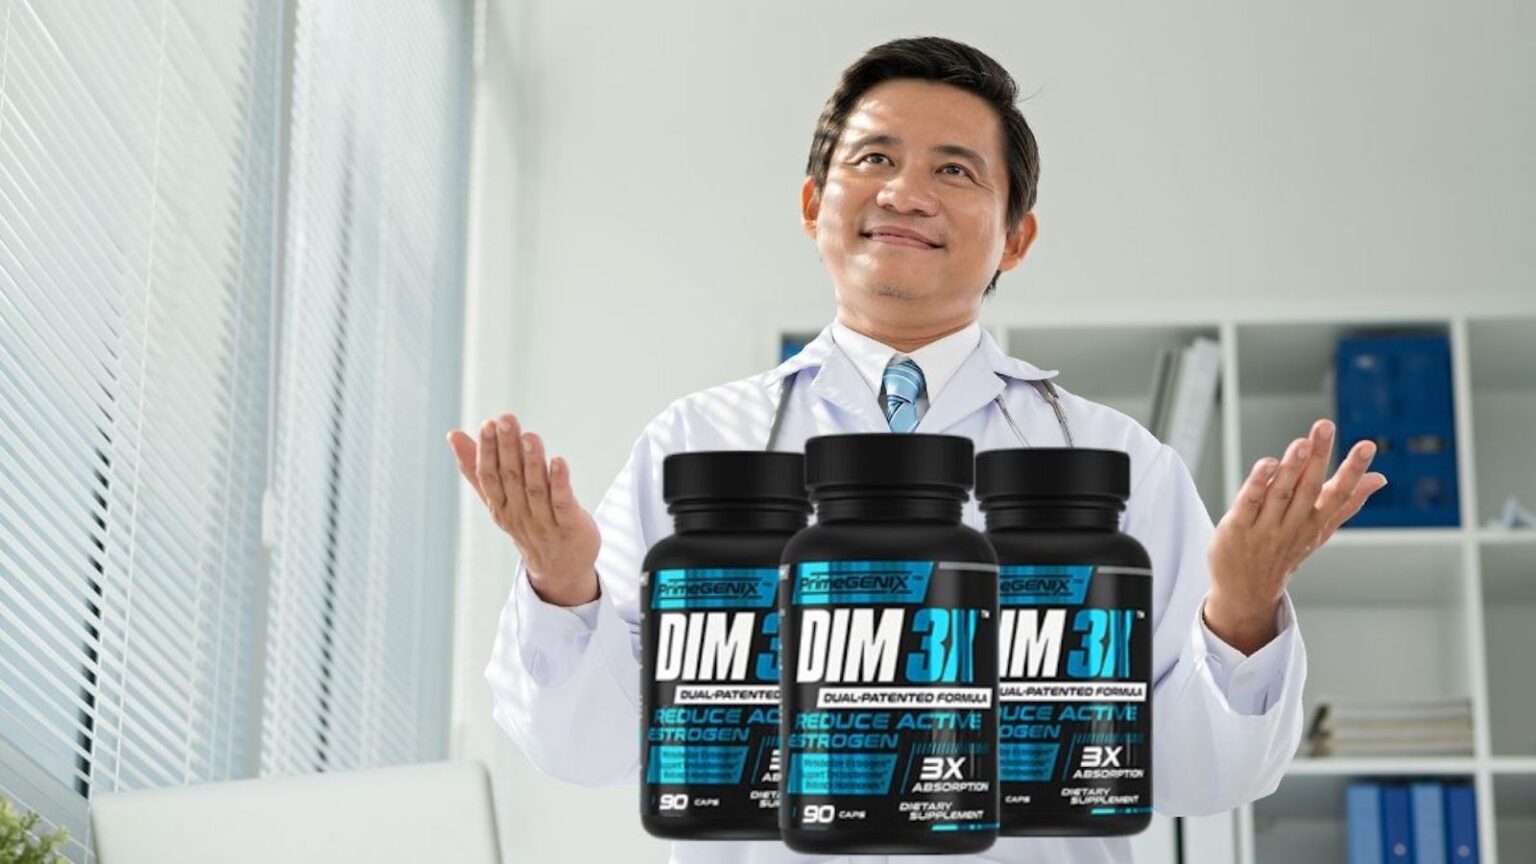 PrimeGENIX DIM 3X is a new supplement that has been engineered to help people get the most out of their workouts and naturally increase their testosterone.